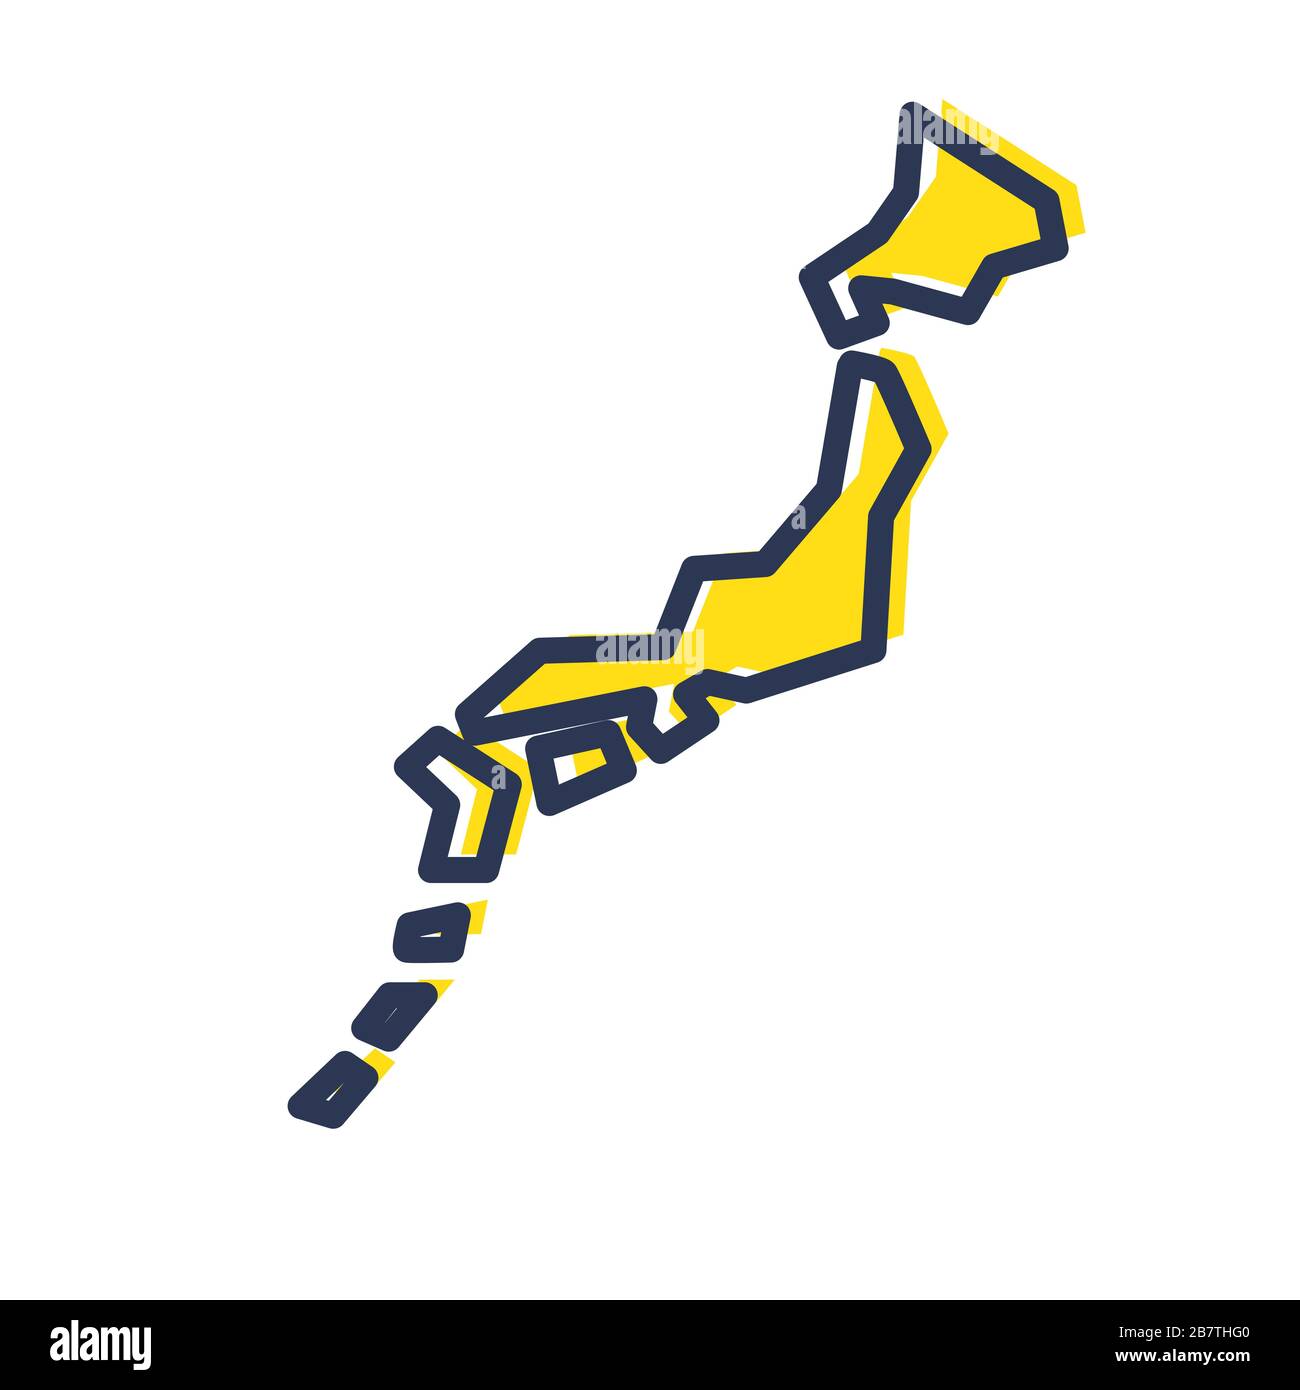 Stylized simple yellow outline map of Japan Stock Vector